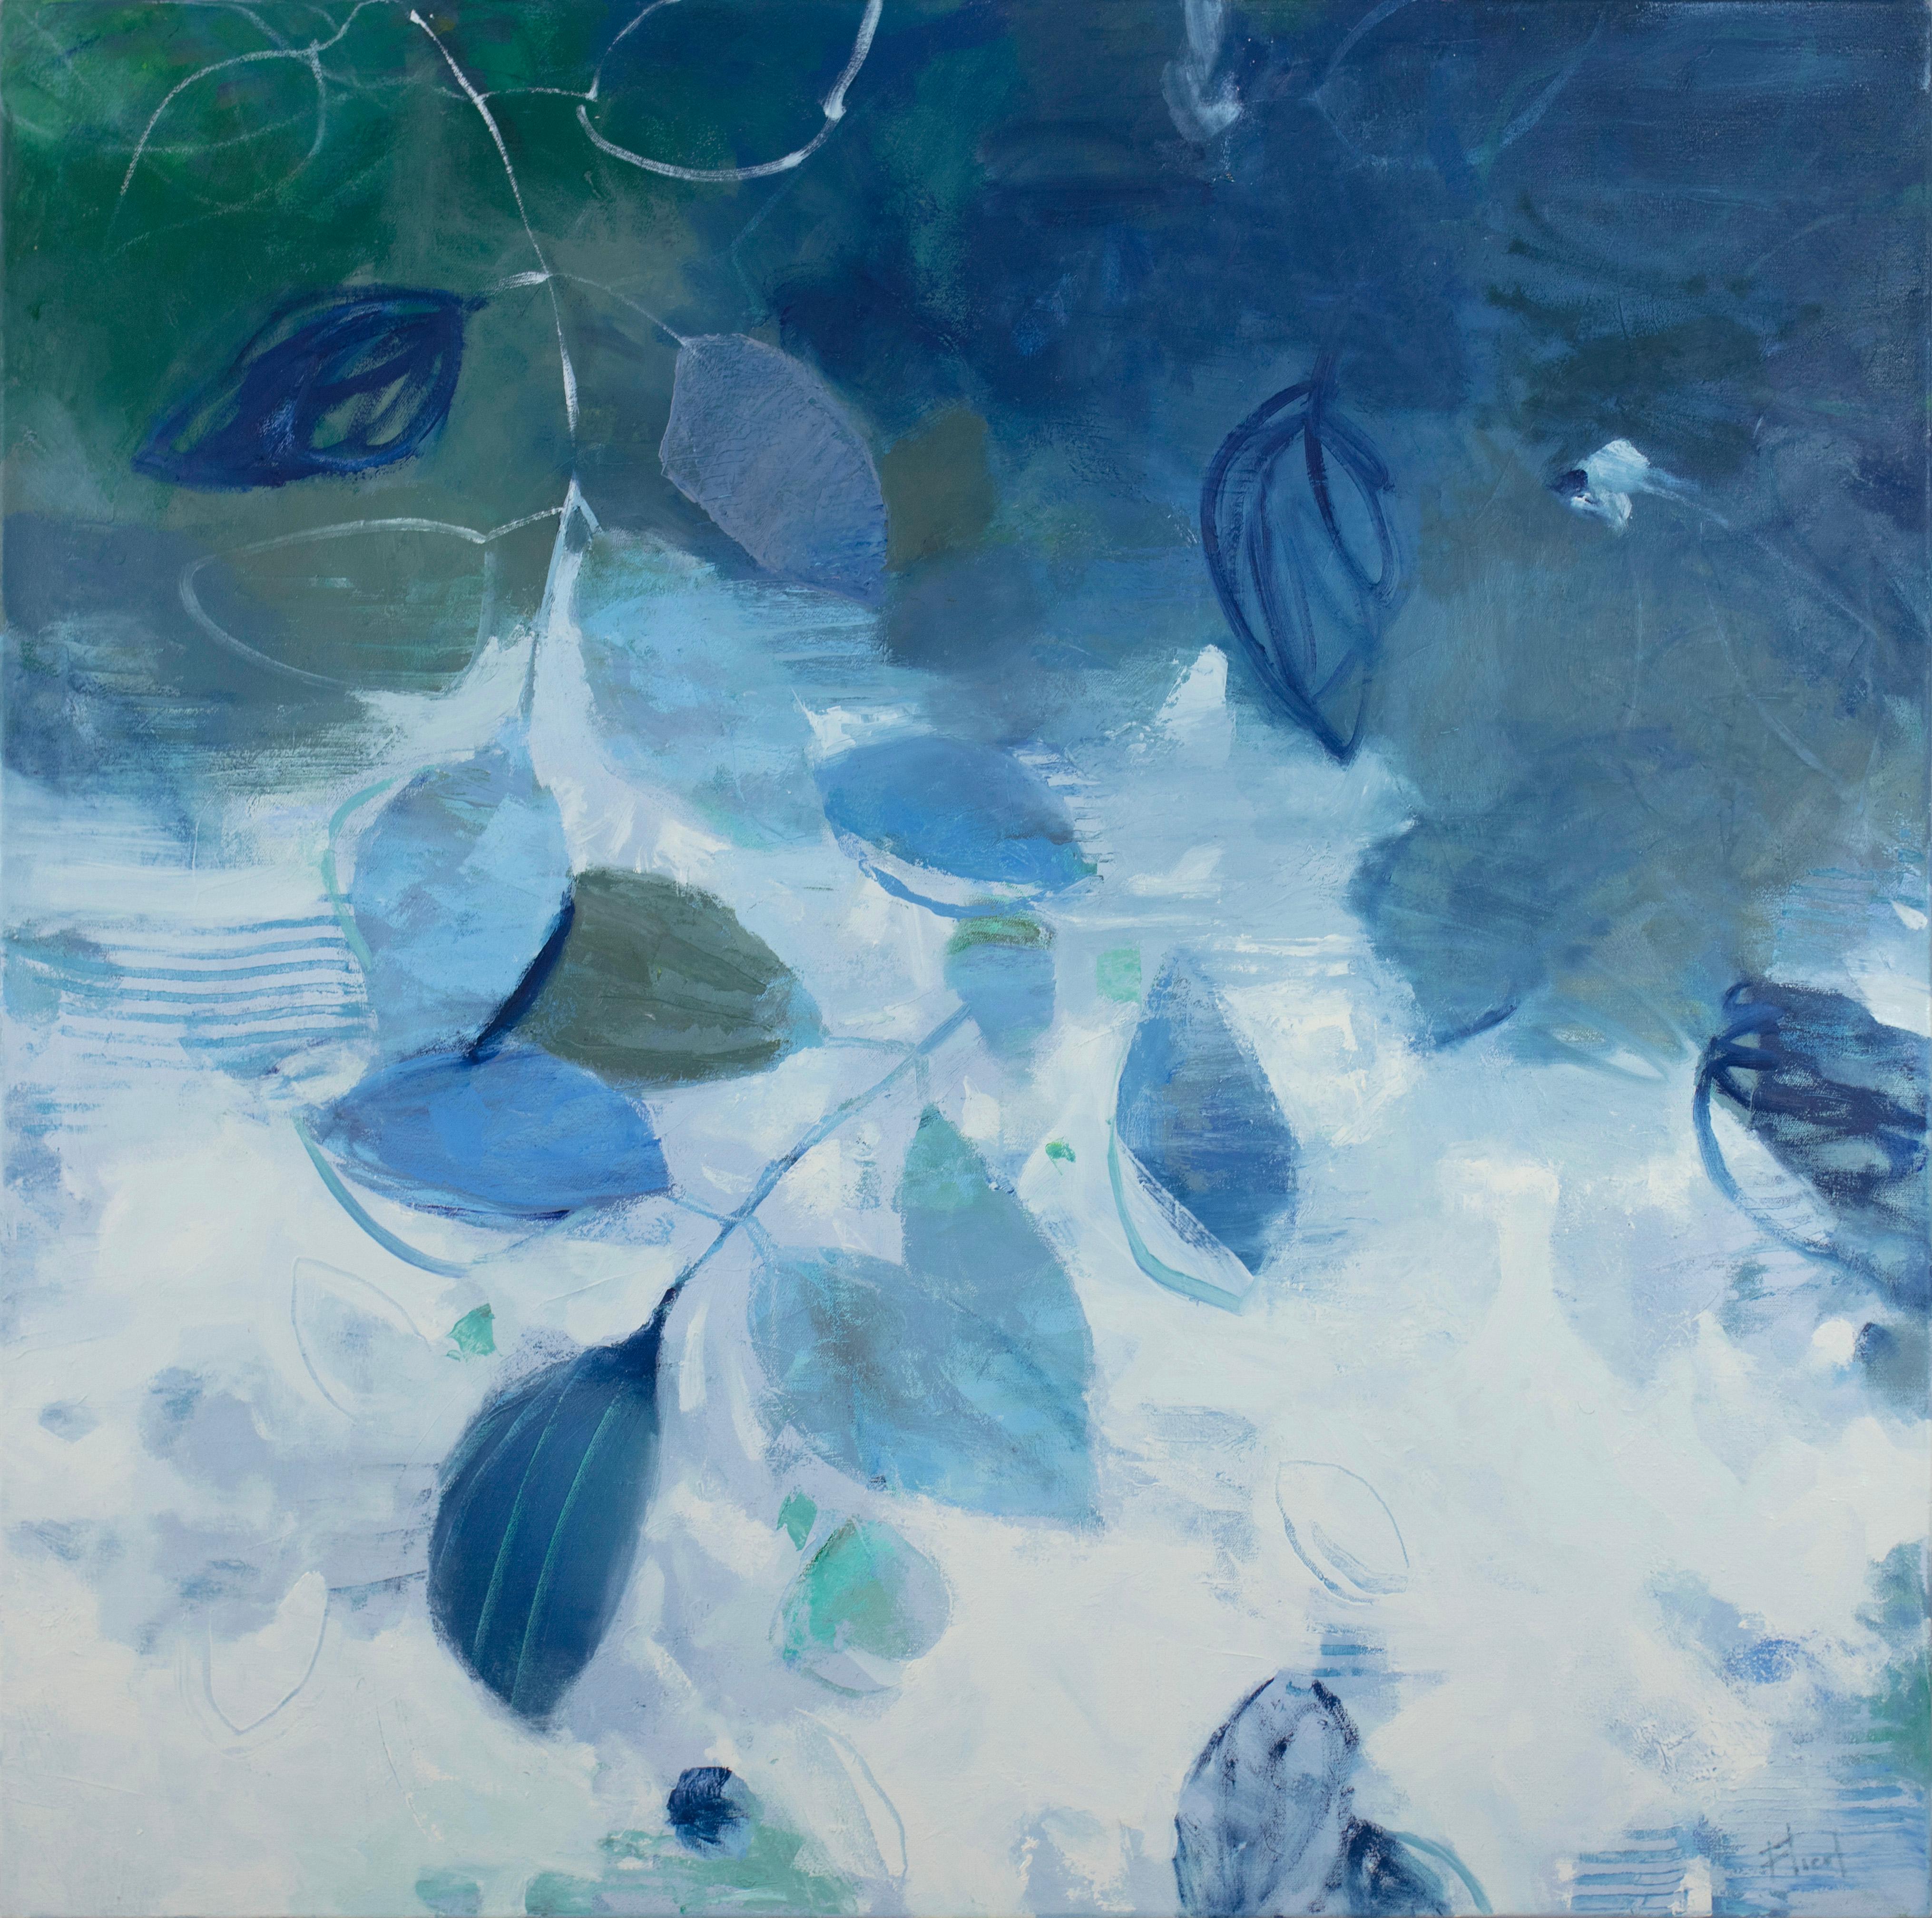 This abstracted floral painting by Kay Flierl features a blue, white, and green palette, with loosely abstracted leaf shapes layered together throughout the composition. The painting is made with oil paint on gallery wrapped canvas with neutral